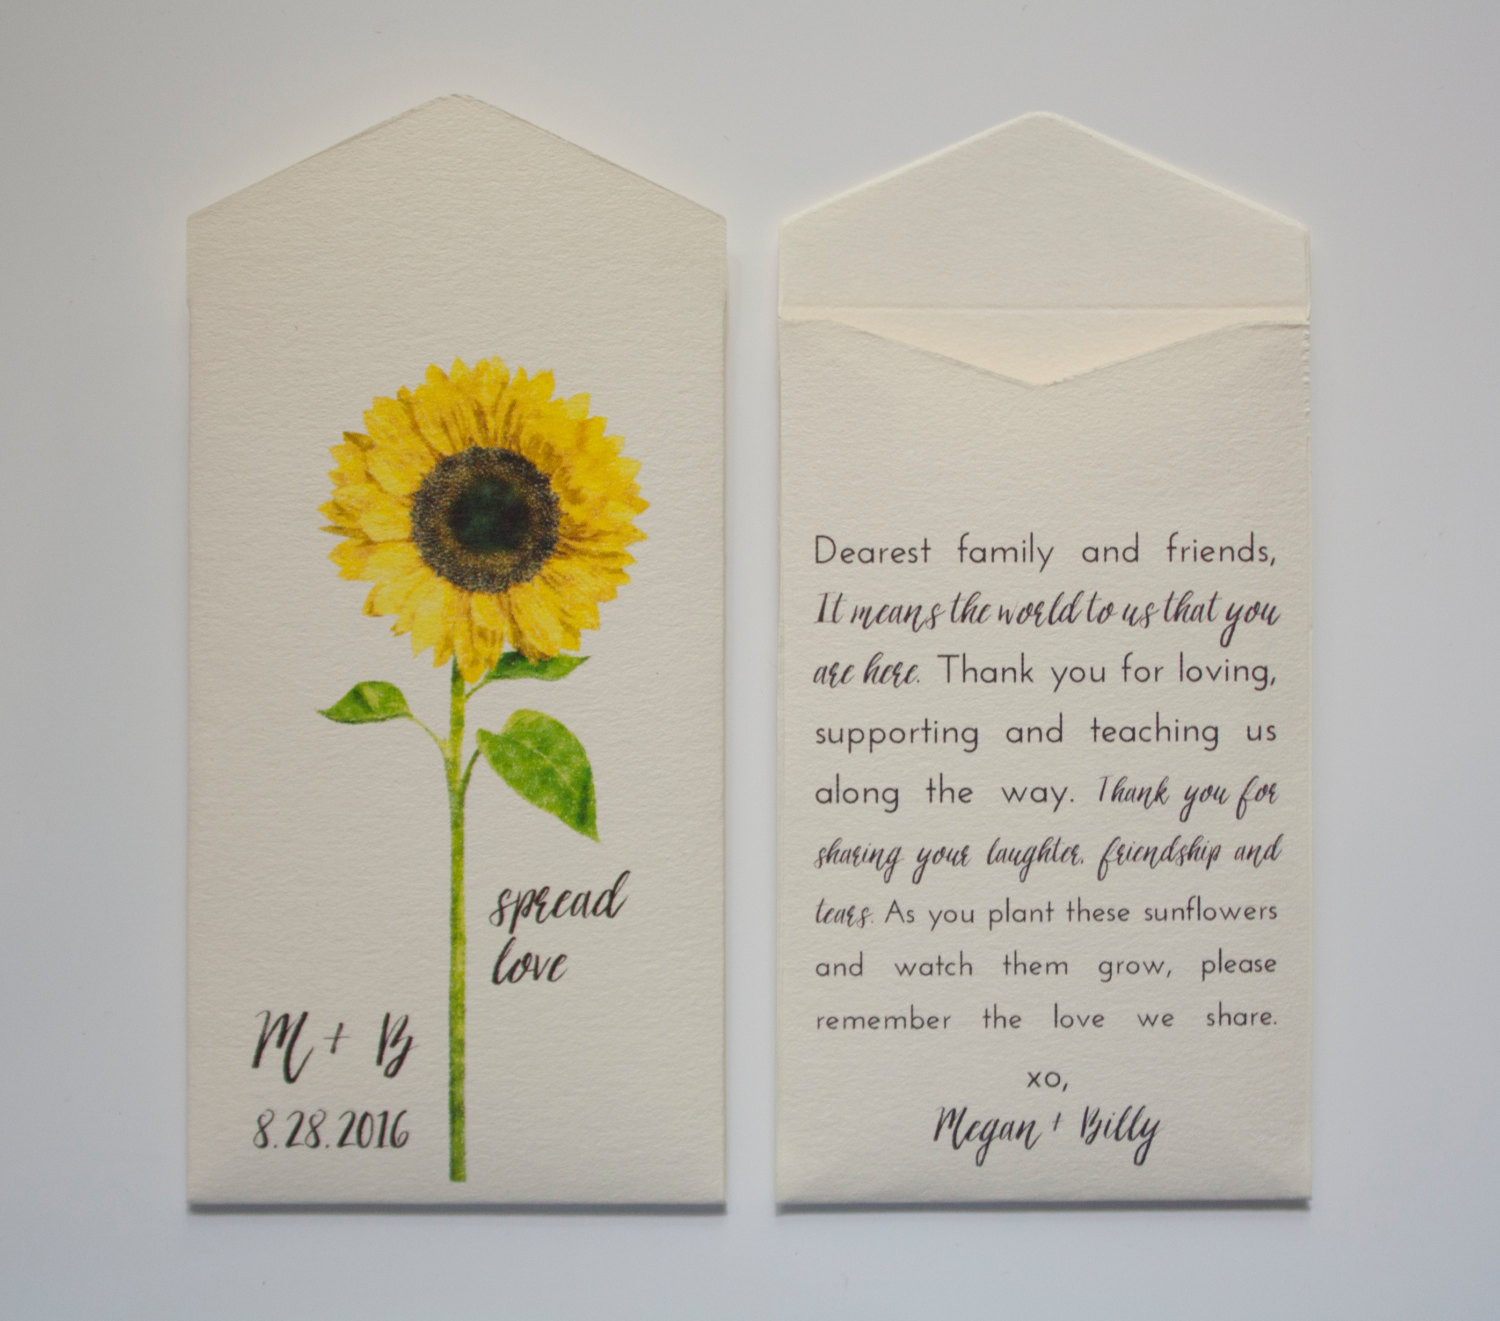 Wedding Favor Seed Packets
 Sunflower Seed Packet Wedding Favor Envelopes Many Colors